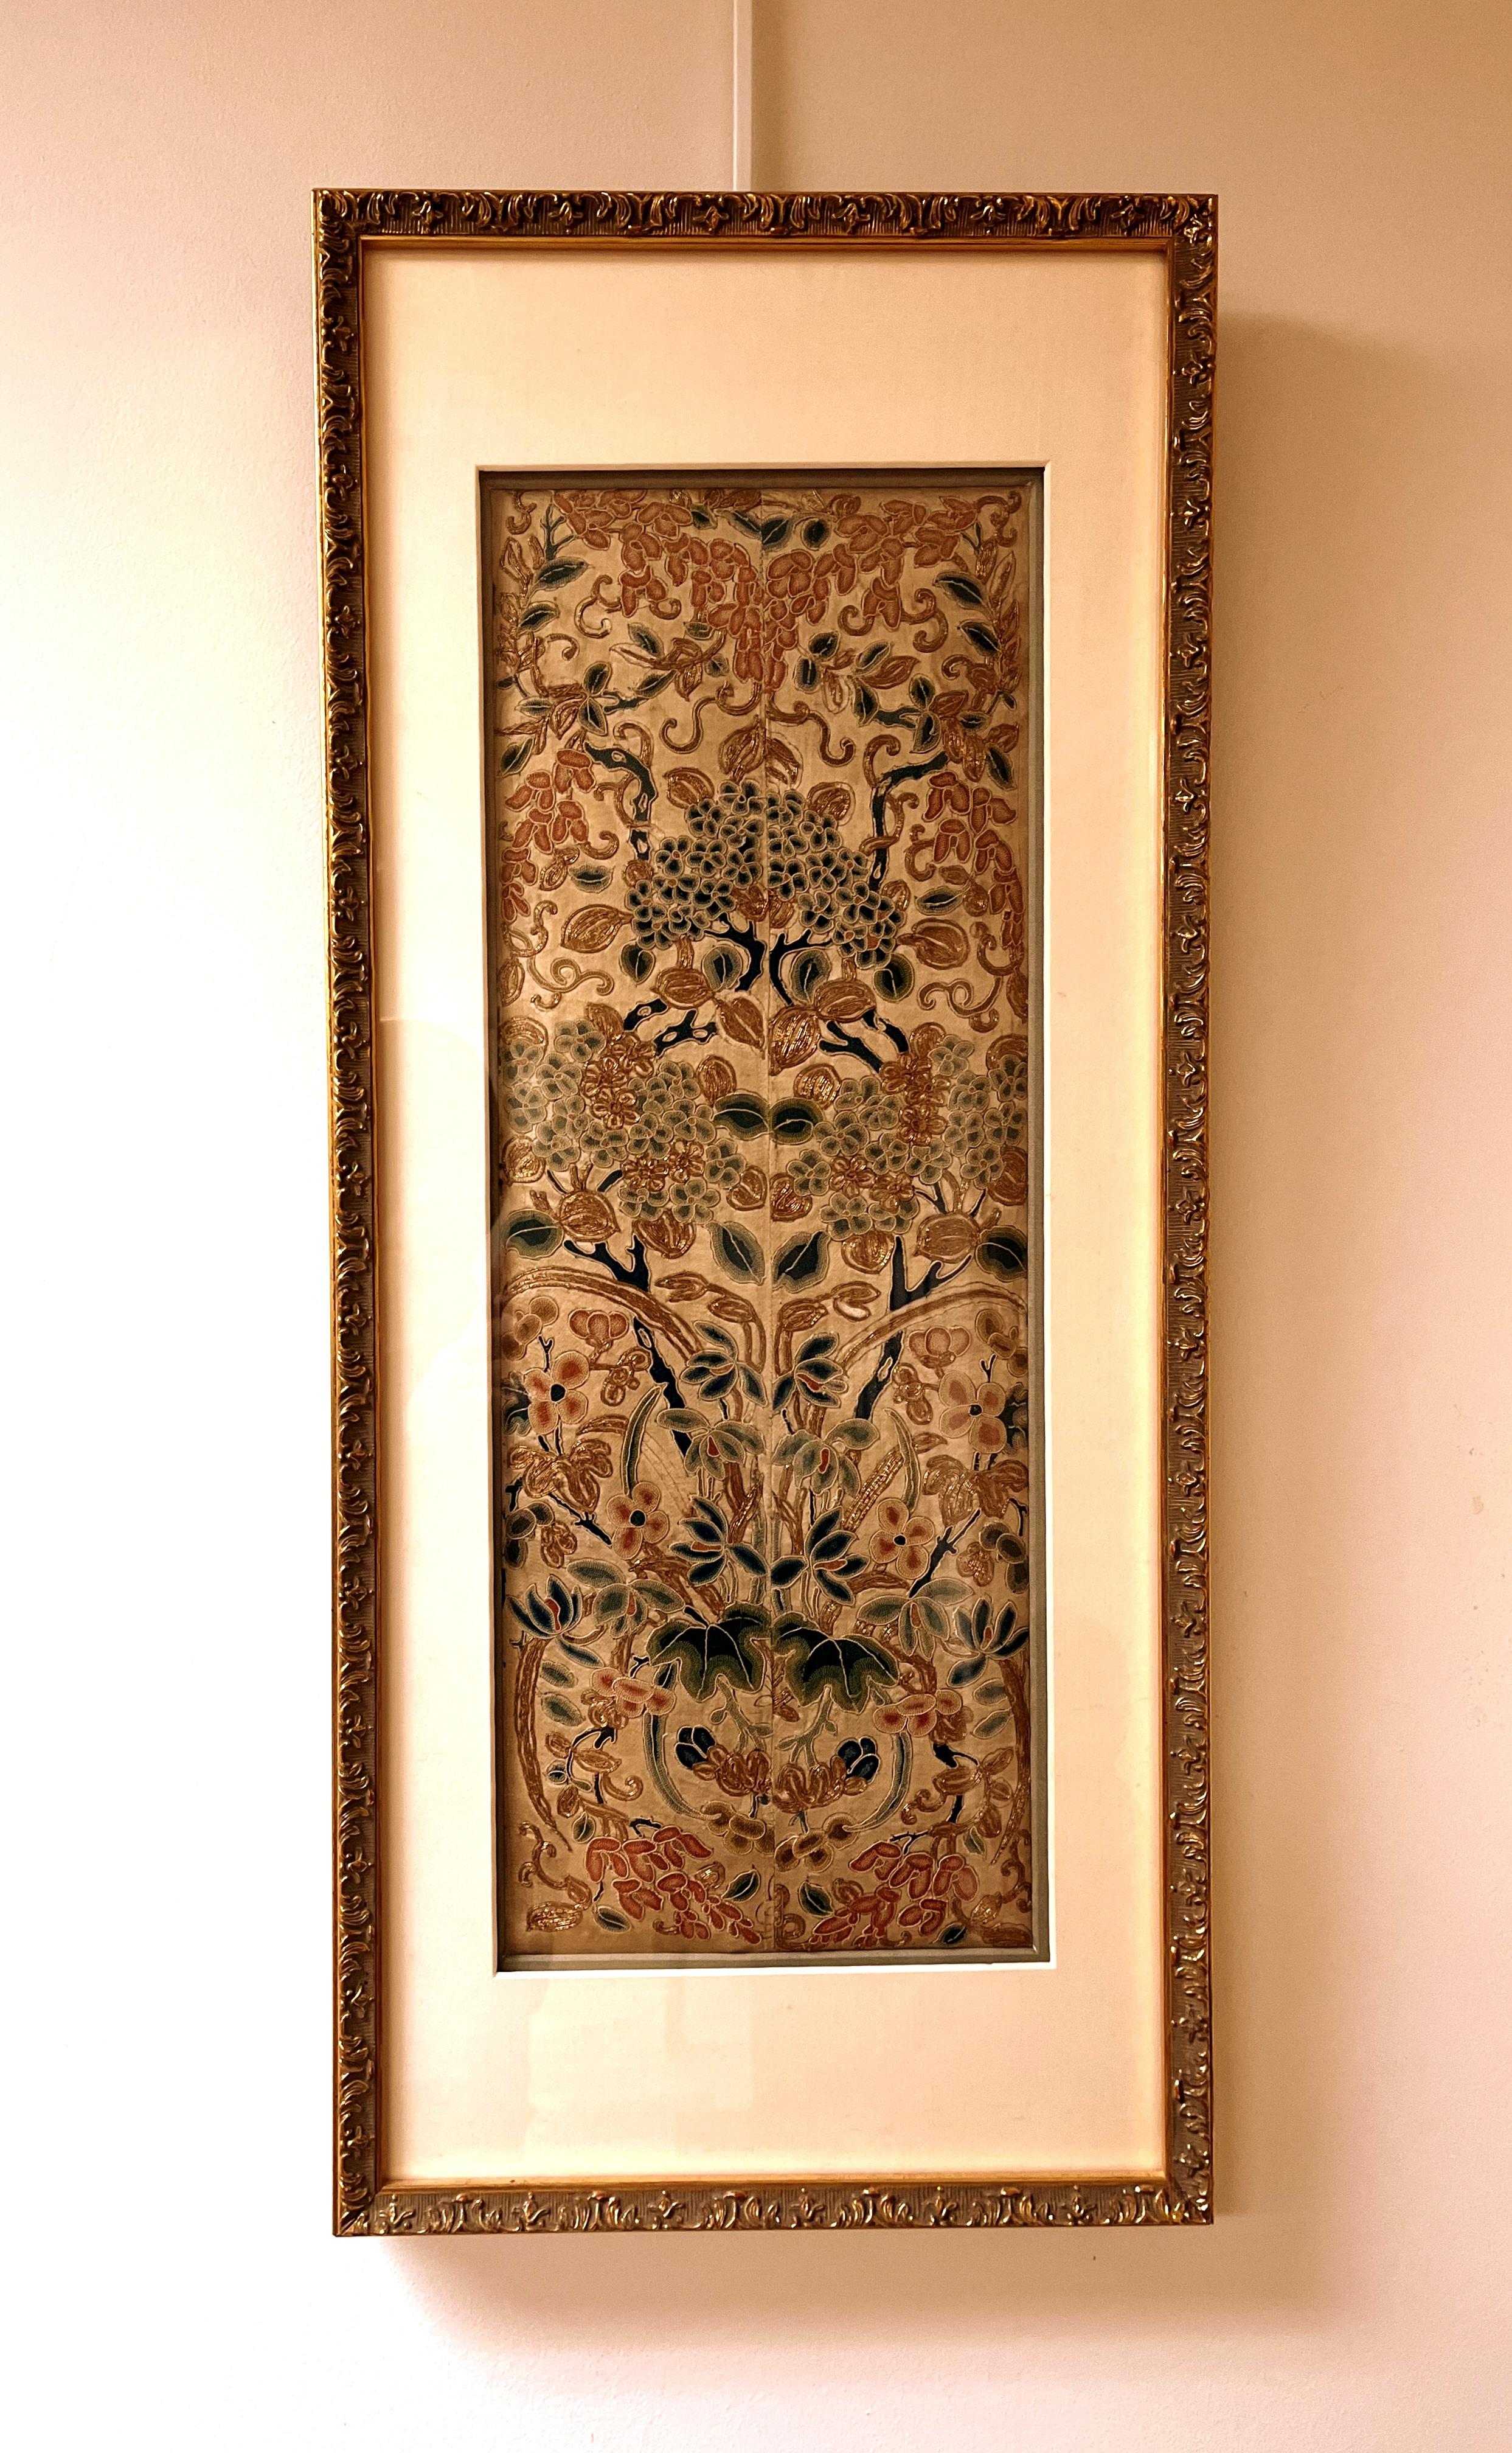 Fined silk hand embroidery with floral motif in seed stitch, couching stitch with gold leaf thread, 19th century
Conservation framed
Overall size:  26.5